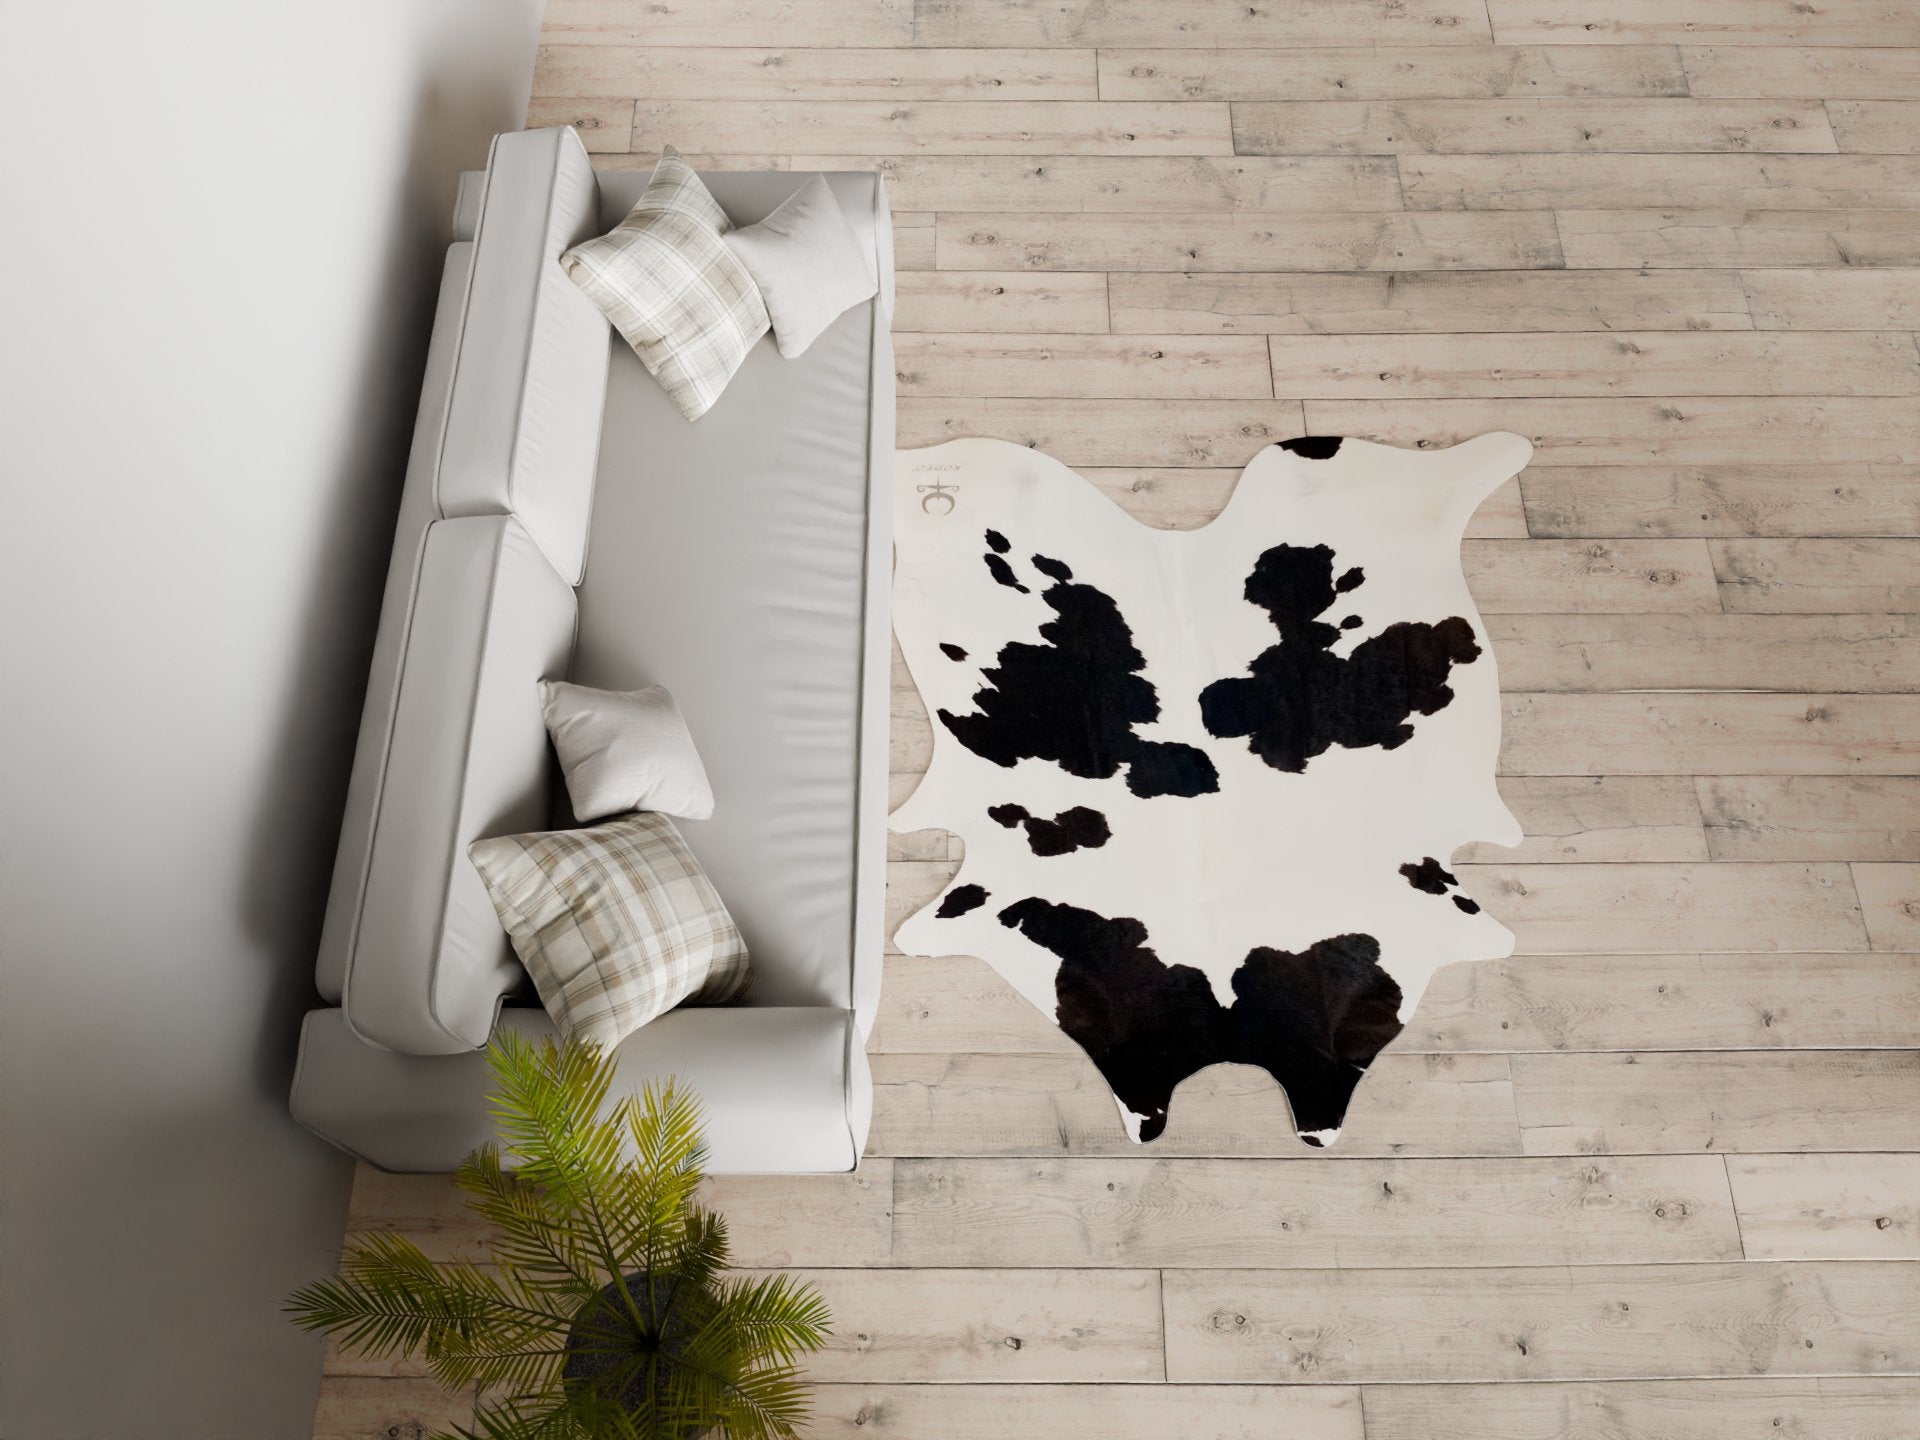 Black and White Cowhide Rug Size 6.6x6 ft---4673 - Rodeo Cowhide Rugs